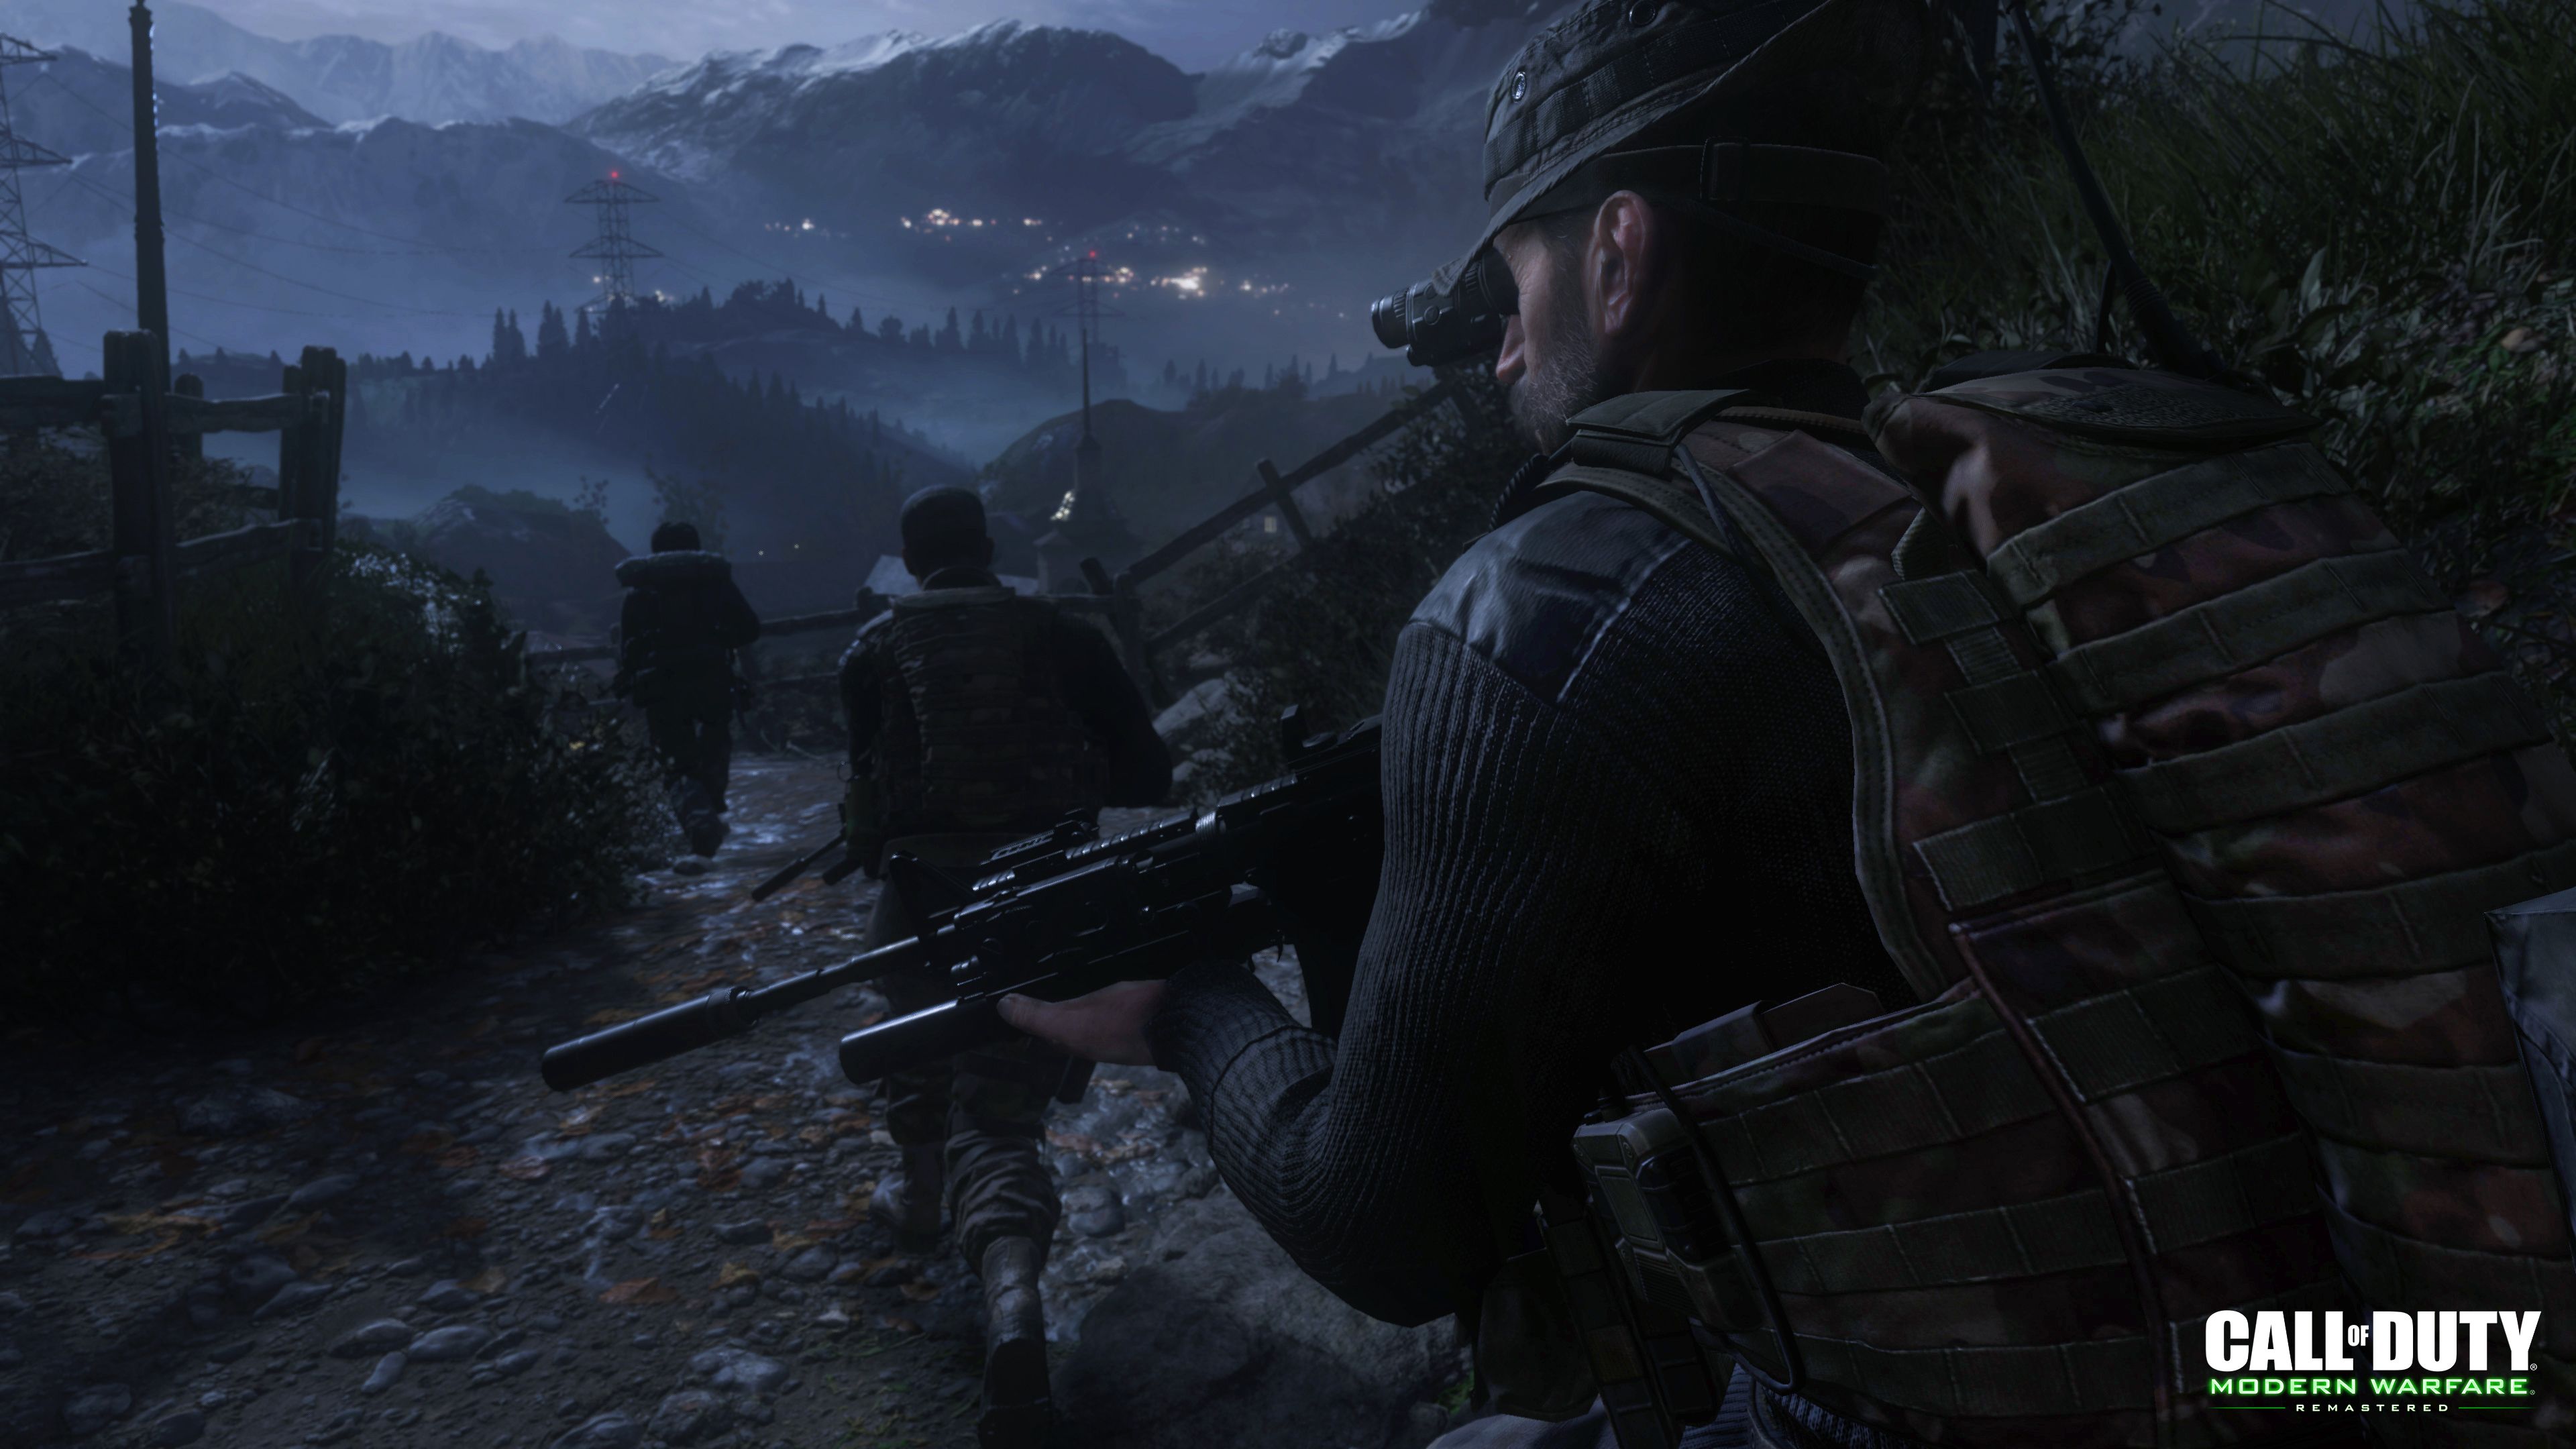 Modern Warfare Remastered has 10 multiplayer maps, full campaign